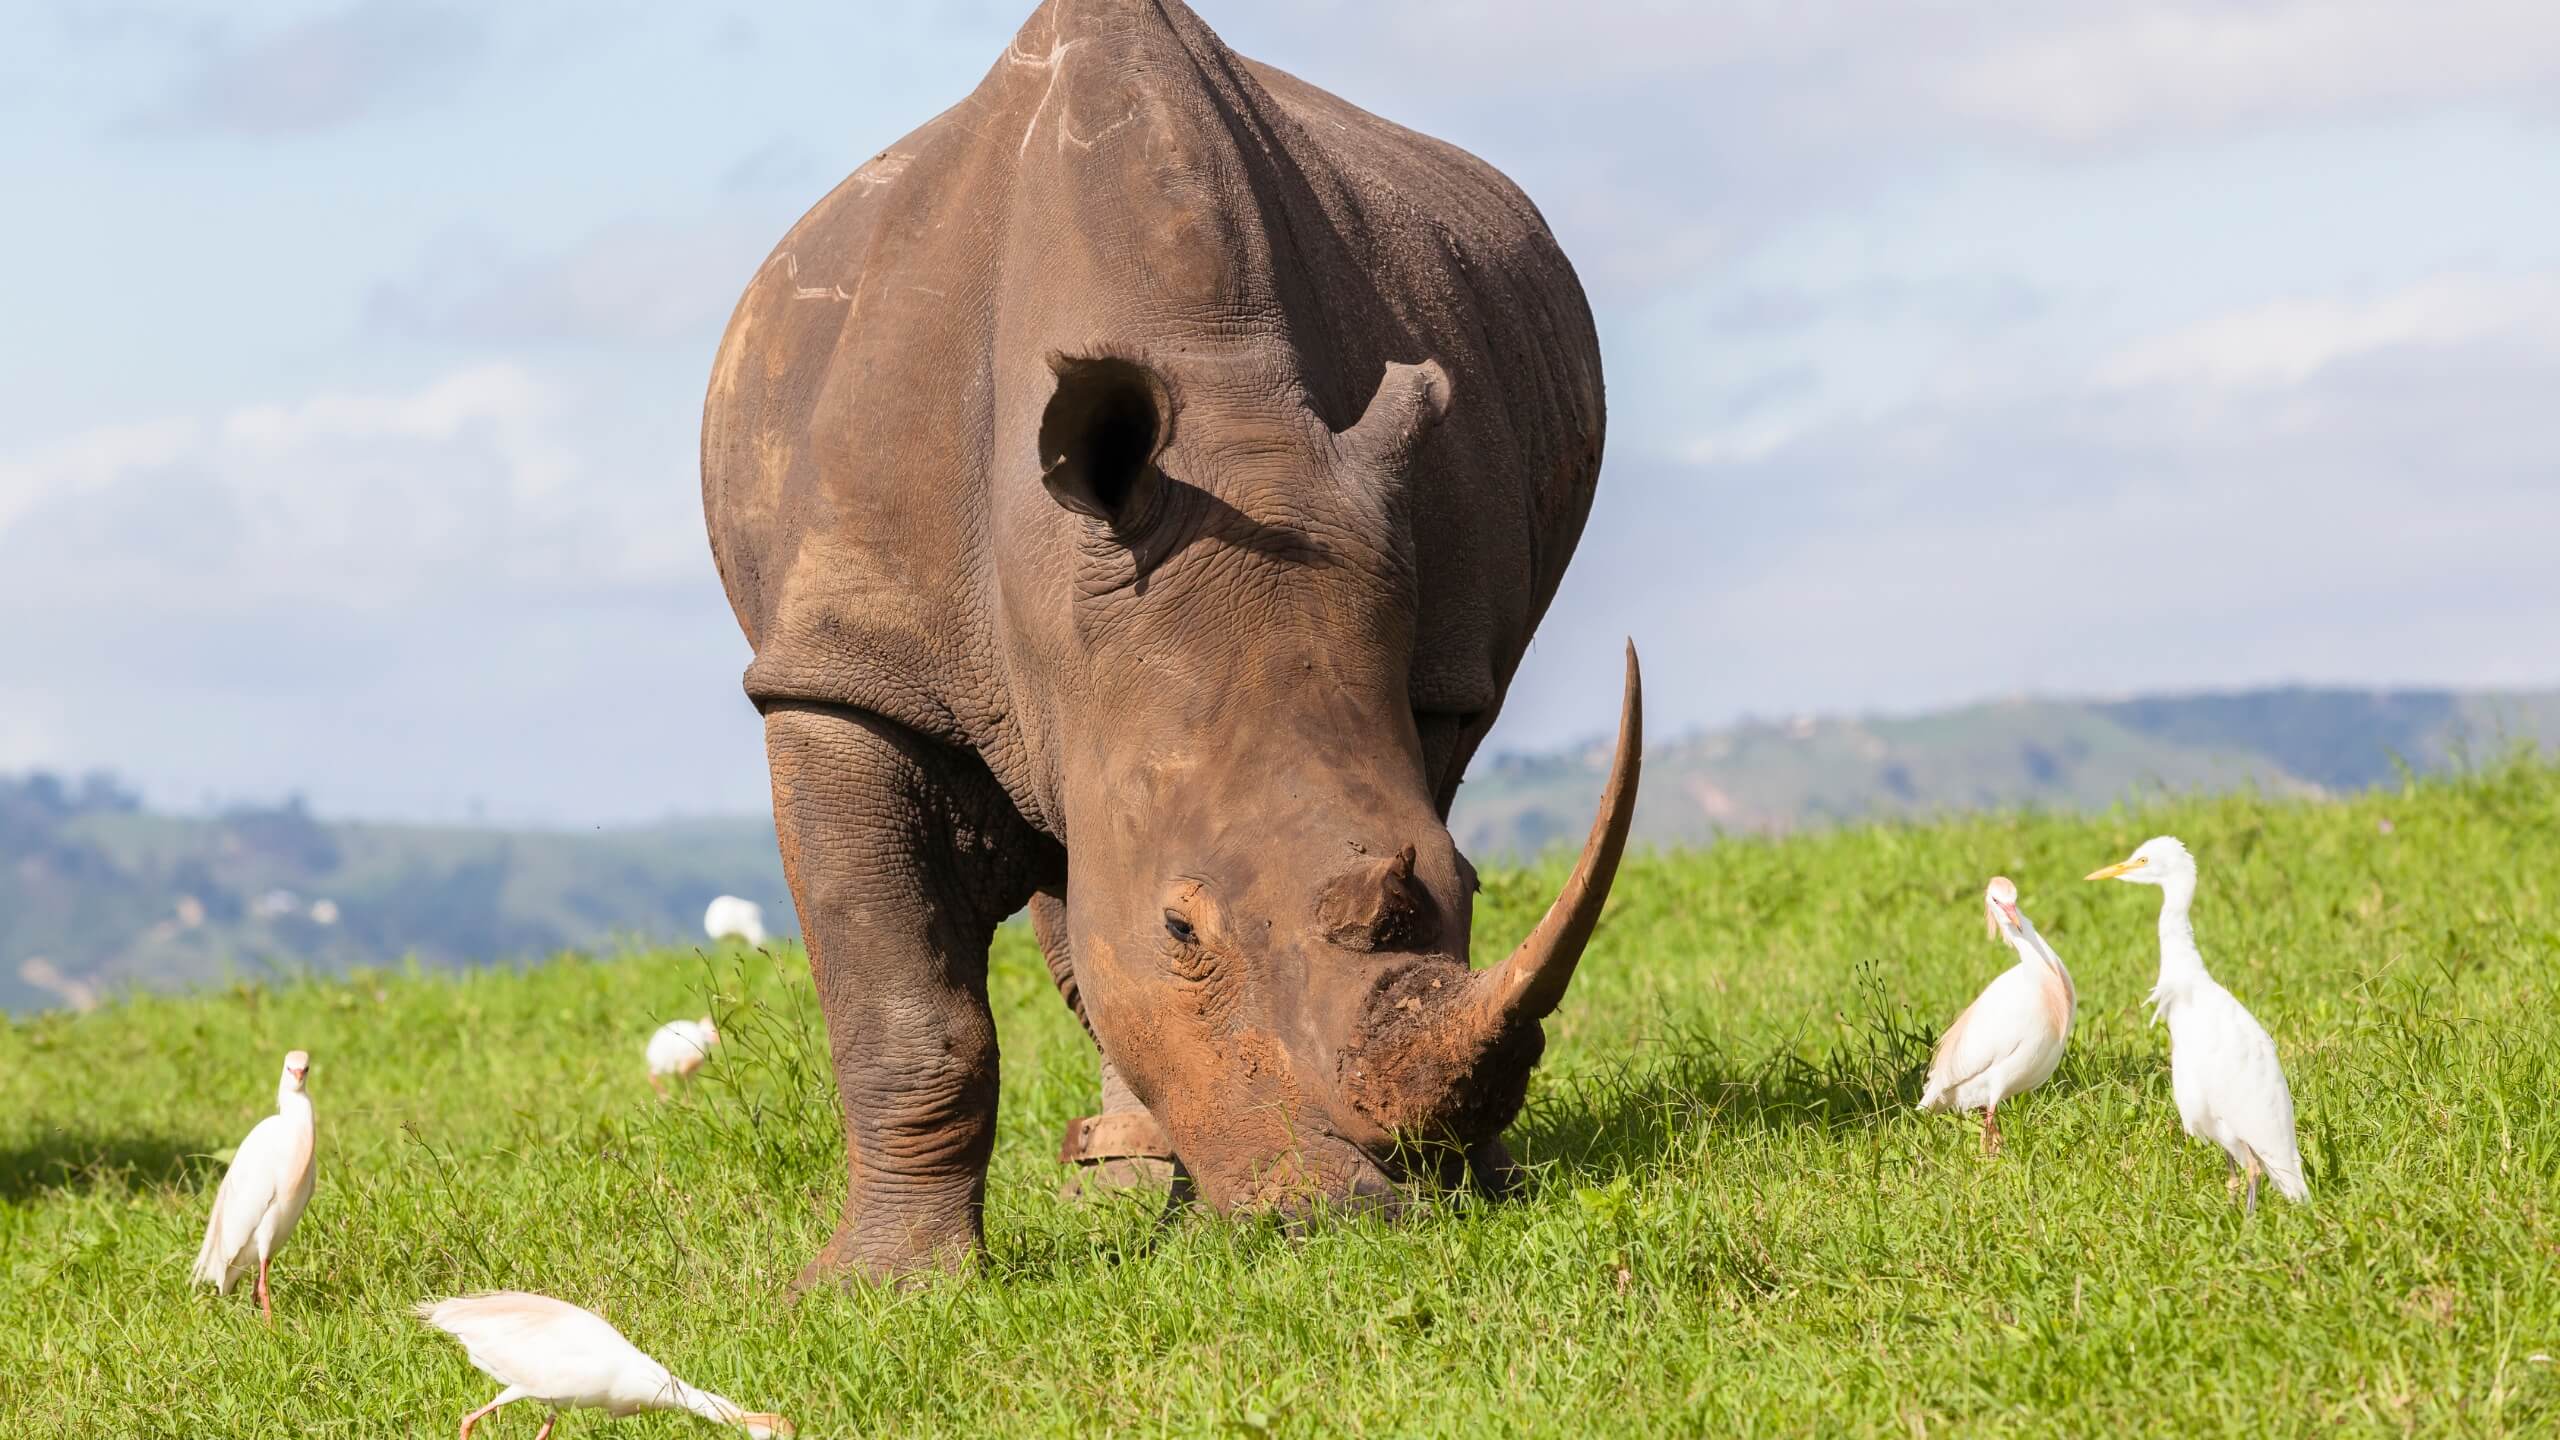 How many rhinos are left in the world